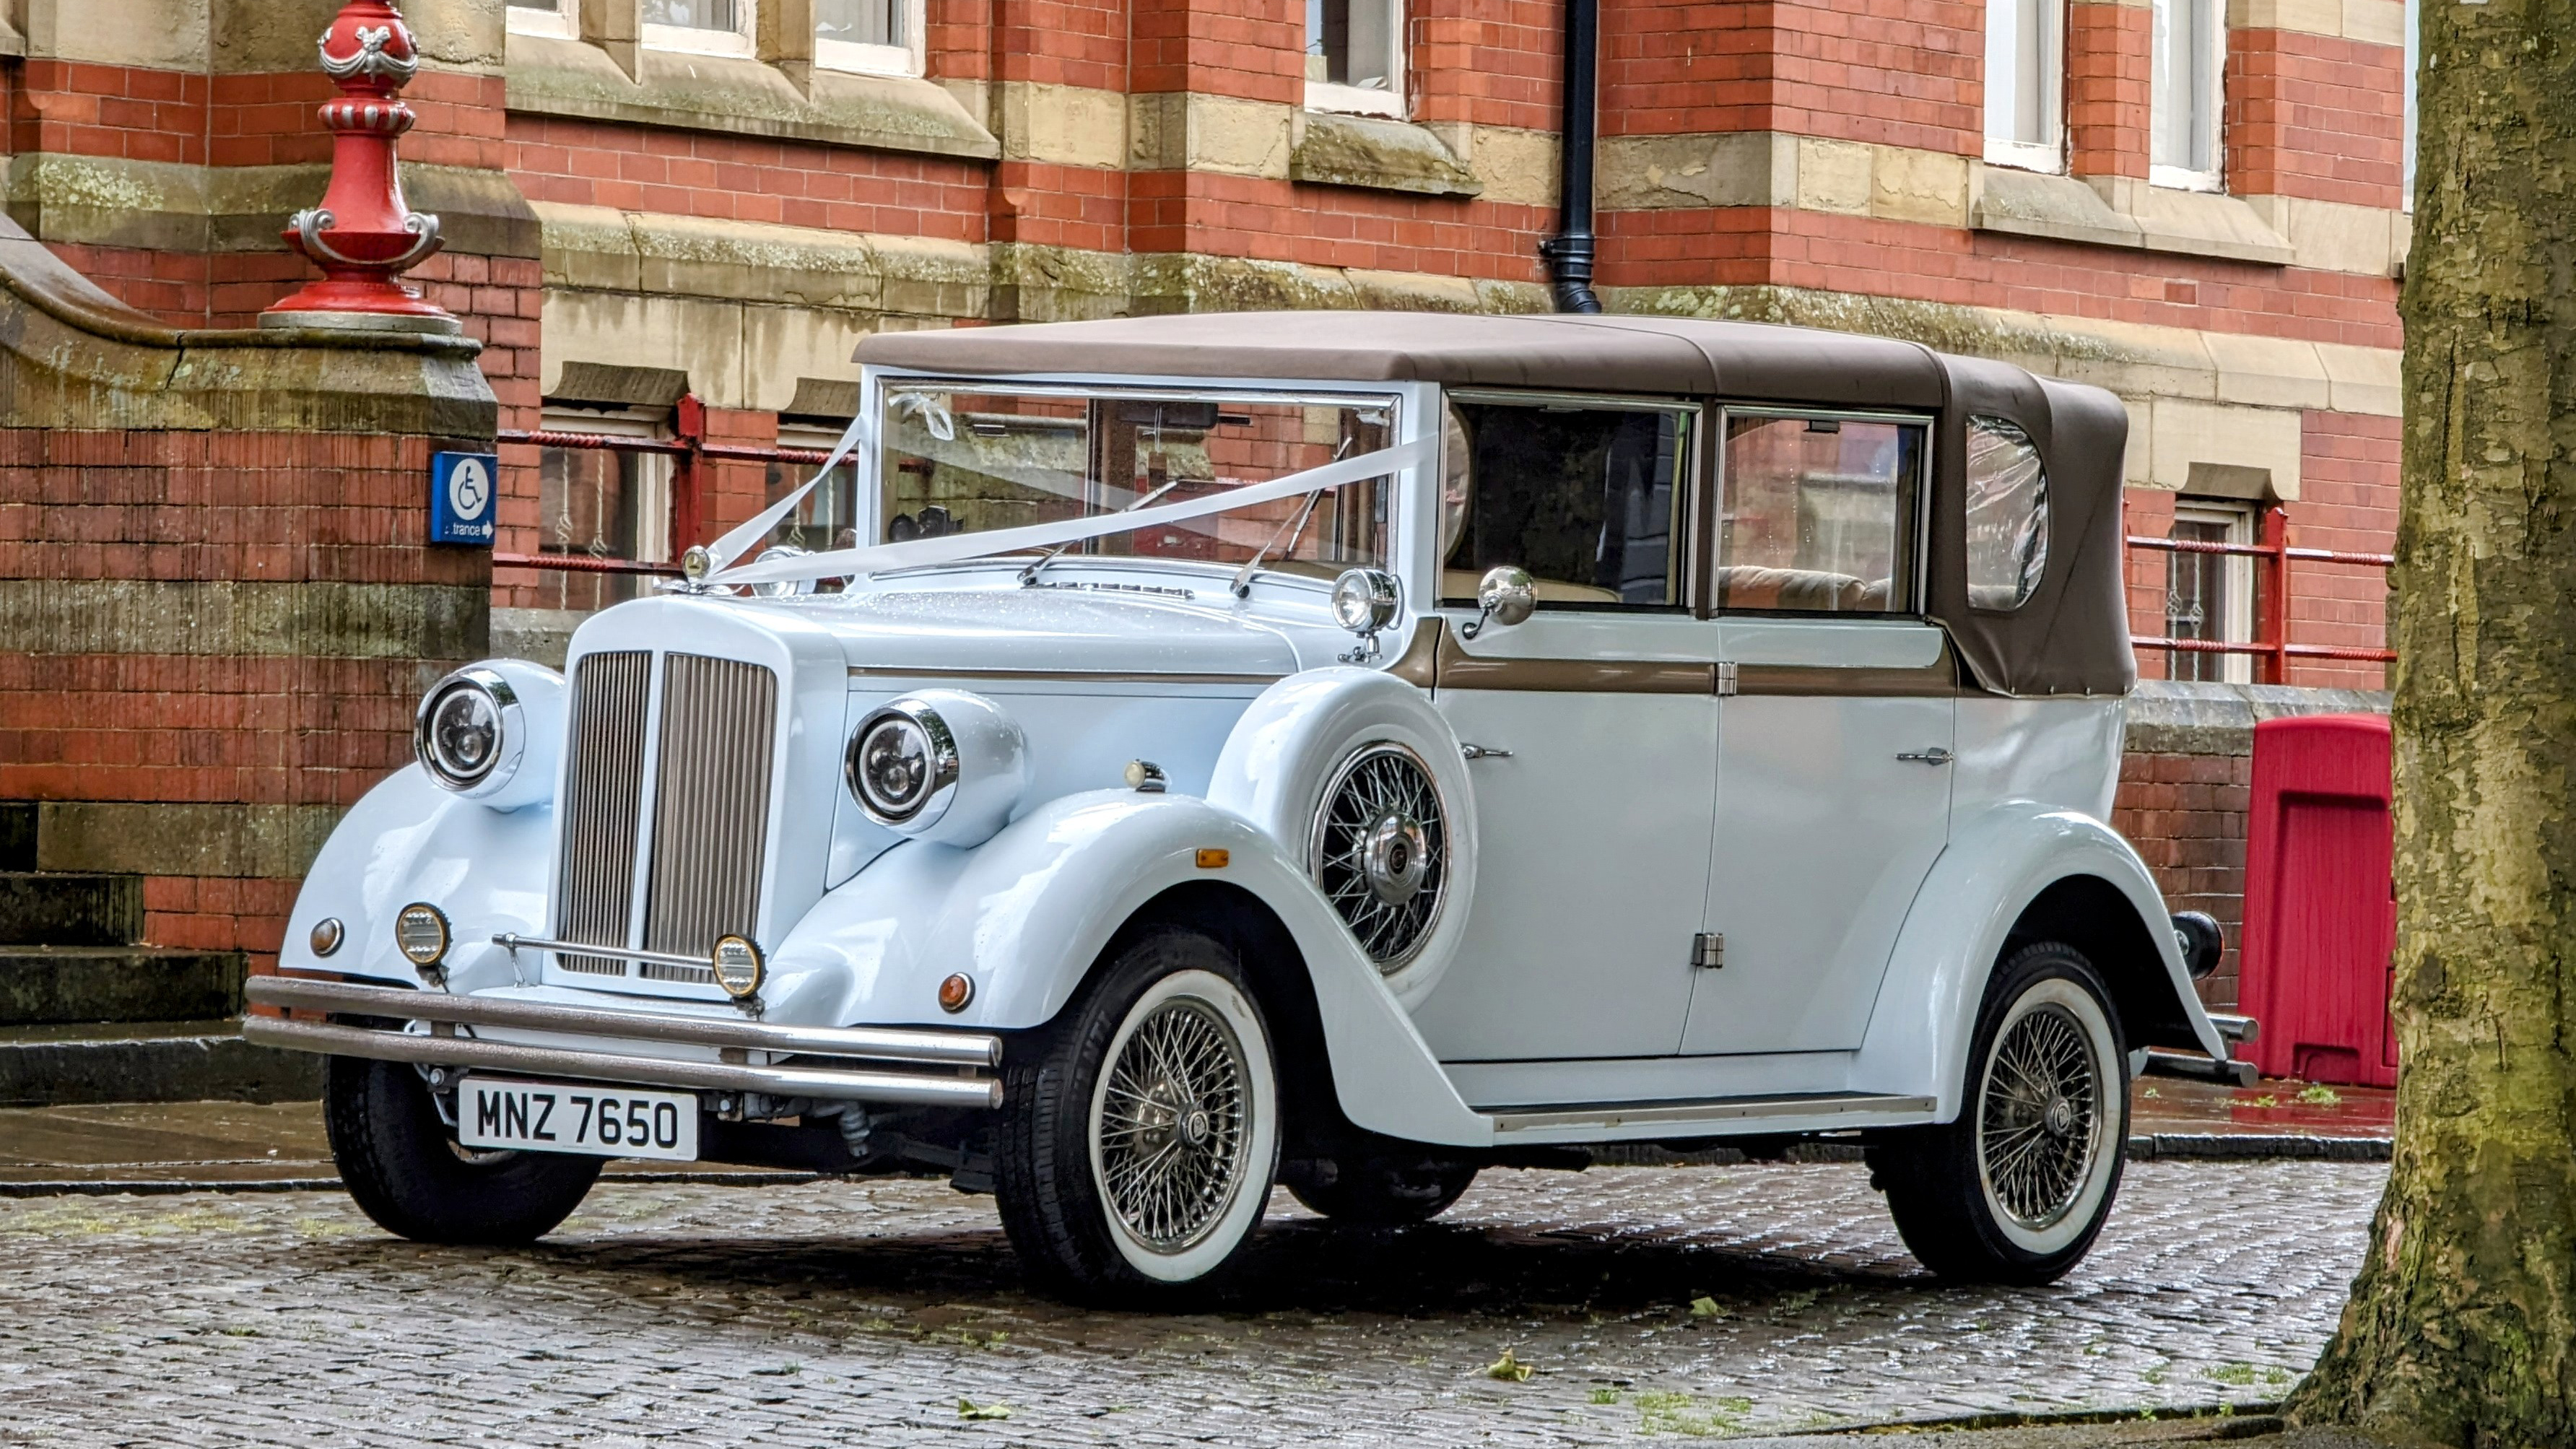 1930's vintage style car Manchester decorated with white ribbons